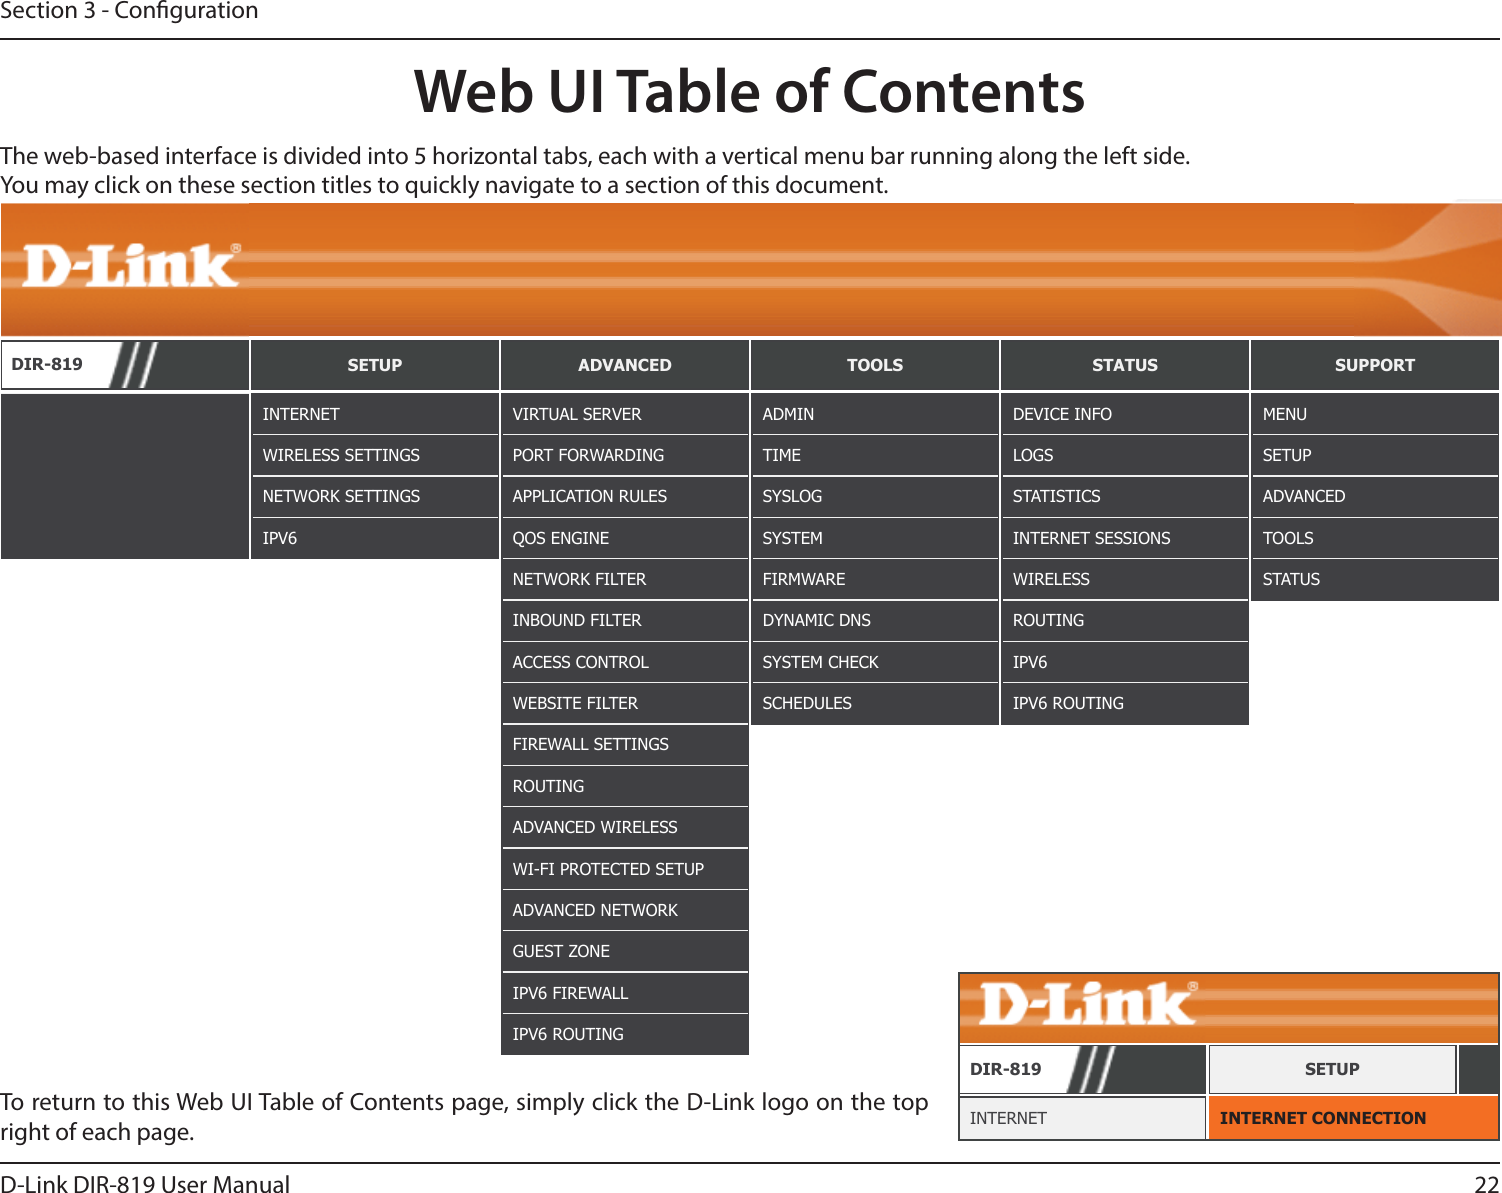 22D-Link DIR-819 User ManualSection 3 - CongurationWeb UI Table of ContentsThe web-based interface is divided into 5 horizontal tabs, each with a vertical menu bar running along the left side. You may click on these section titles to quickly navigate to a section of this document.To return to this Web UI Table of Contents page, simply click the D-Link logo on the top right of each page.DIR-819 SETUP ADVANCED TOOLS STATUS SUPPORTINTERNETWIRELESS SETTINGSNETWORK SETTINGSIPV6ADMINTIMESYSLOGSYSTEMFIRMWAREDYNAMIC DNSSYSTEM CHECKSCHEDULESDEVICE INFOLOGSSTATISTICSINTERNET SESSIONSWIRELESSROUTINGIPV6IPV6 ROUTINGMENUSETUPADVANCEDTOOLSSTATUSVIRTUAL SERVERPORT FORWARDINGAPPLICATION RULESQOS ENGINENETWORK FILTERINBOUND FILTERACCESS CONTROLWEBSITE FILTERFIREWALL SETTINGSROUTINGADVANCED WIRELESSWI-FI PROTECTED SETUPADVANCED NETWORKGUEST ZONEIPV6 FIREWALLIPV6 ROUTINGINTERNET CONNECTIONINTERNETDIR-819 SETUP